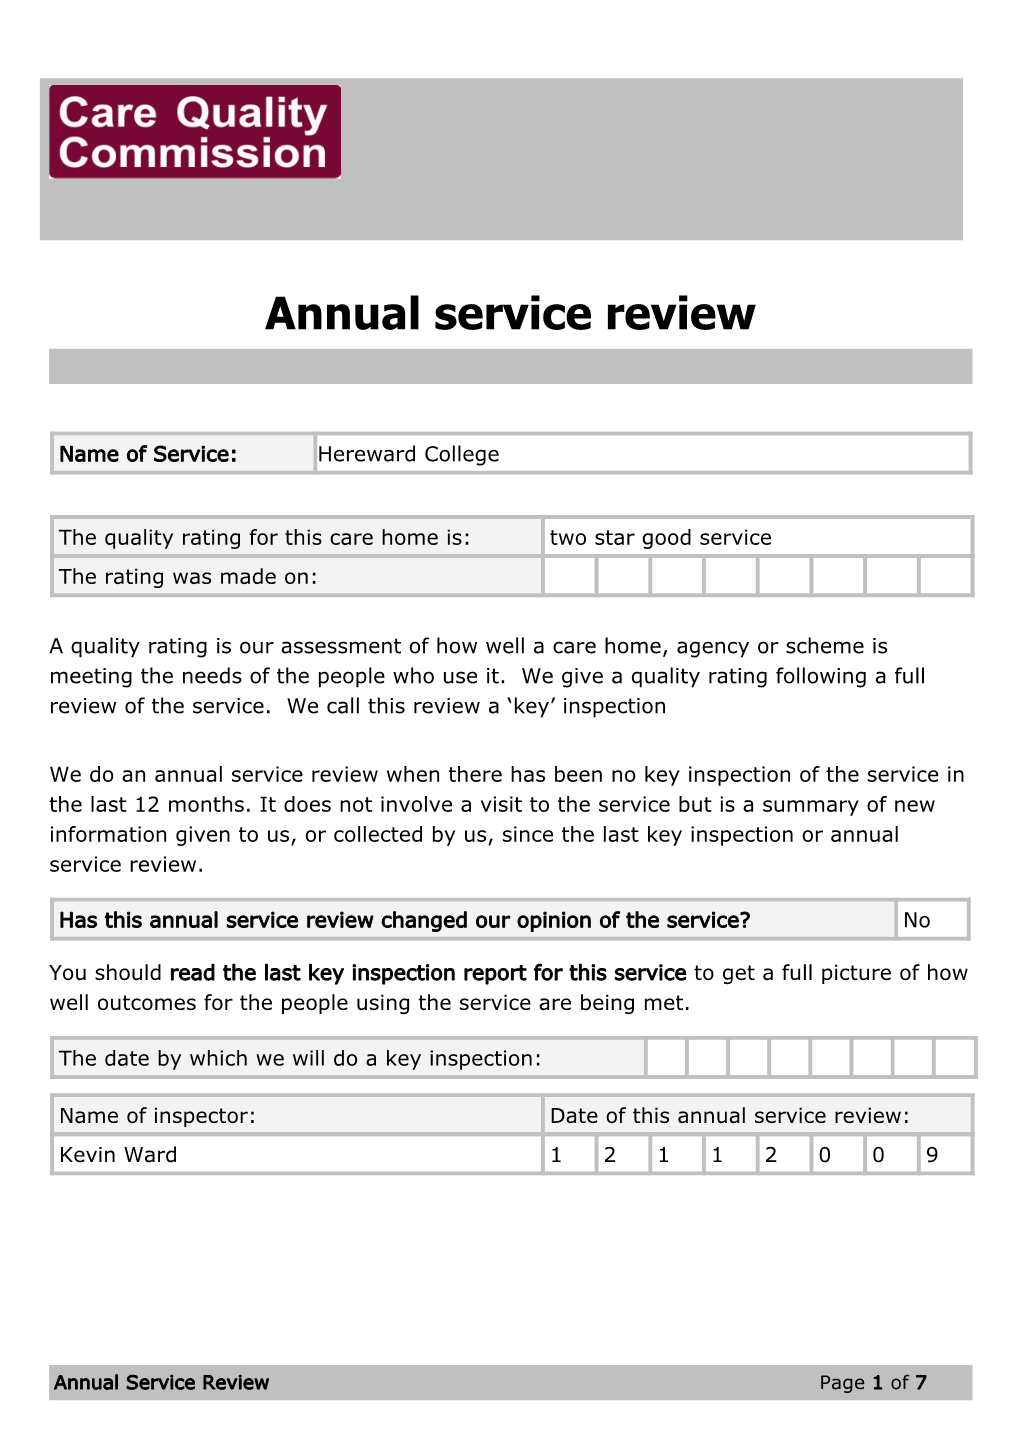 Annual Service Review